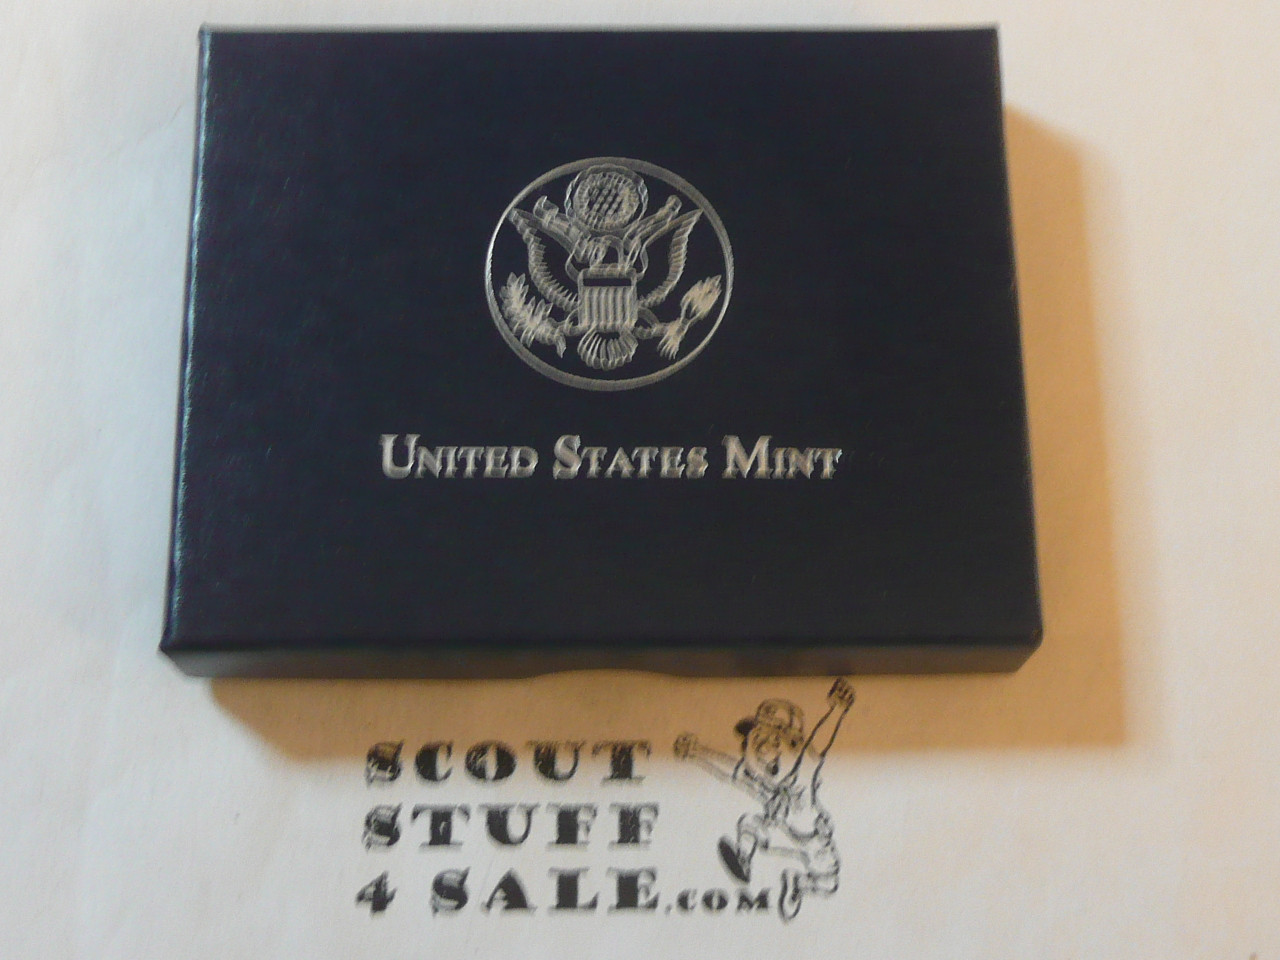 2010 Boy Scouts of America 100th Anniversary Silver Dollar Coin, UNCIRCULATED, US Mint